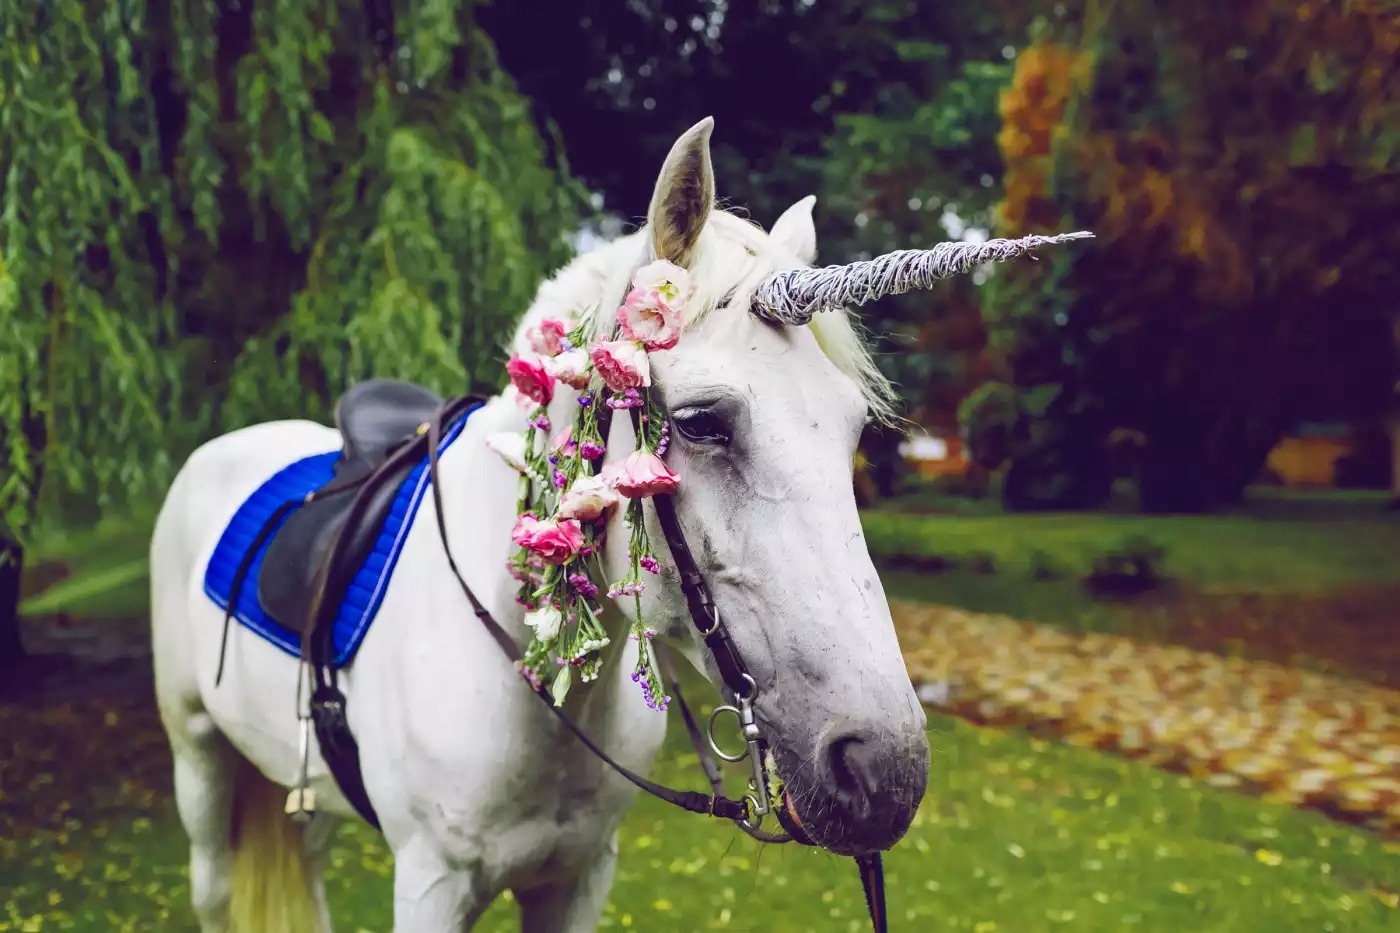 The national animal of Scotland is the unicorn.